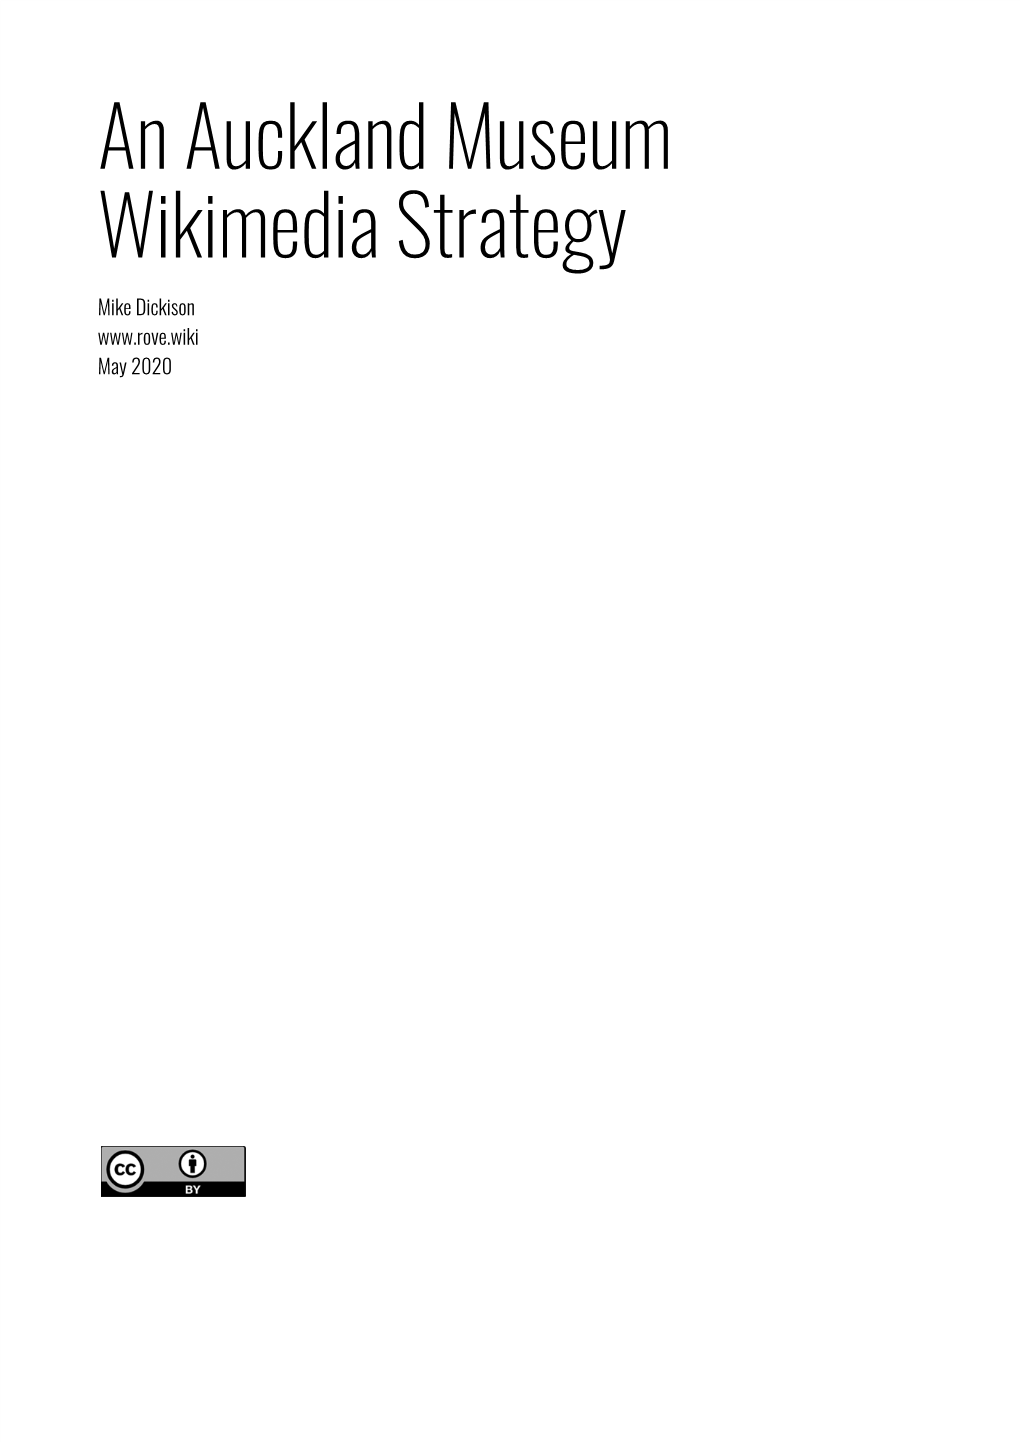 An Auckland Museum Wikimedia Strategy Mike Dickison May 2020